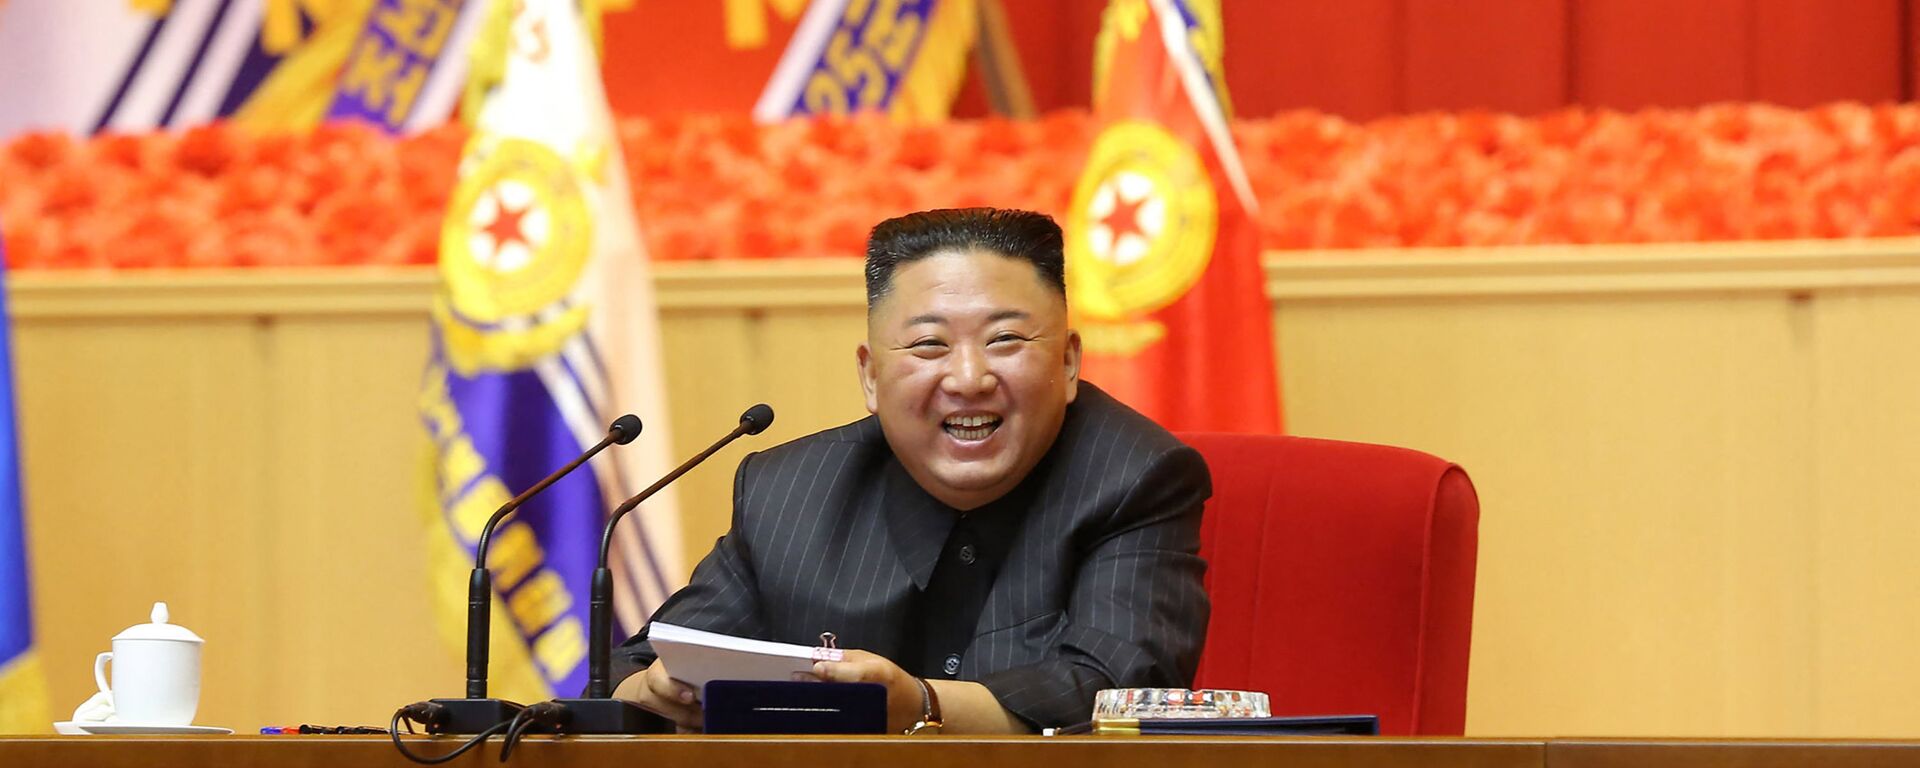 This undated picture released from North Korea's official Korean Central News Agency (KCNA) on July 30, 2021 shows North Korean leader Kim Jong Un taking part in the First Workshop of KPA Commanders and Political Officers, at April 25 House of Culture in Pyongyang. - Sputnik International, 1920, 11.11.2021